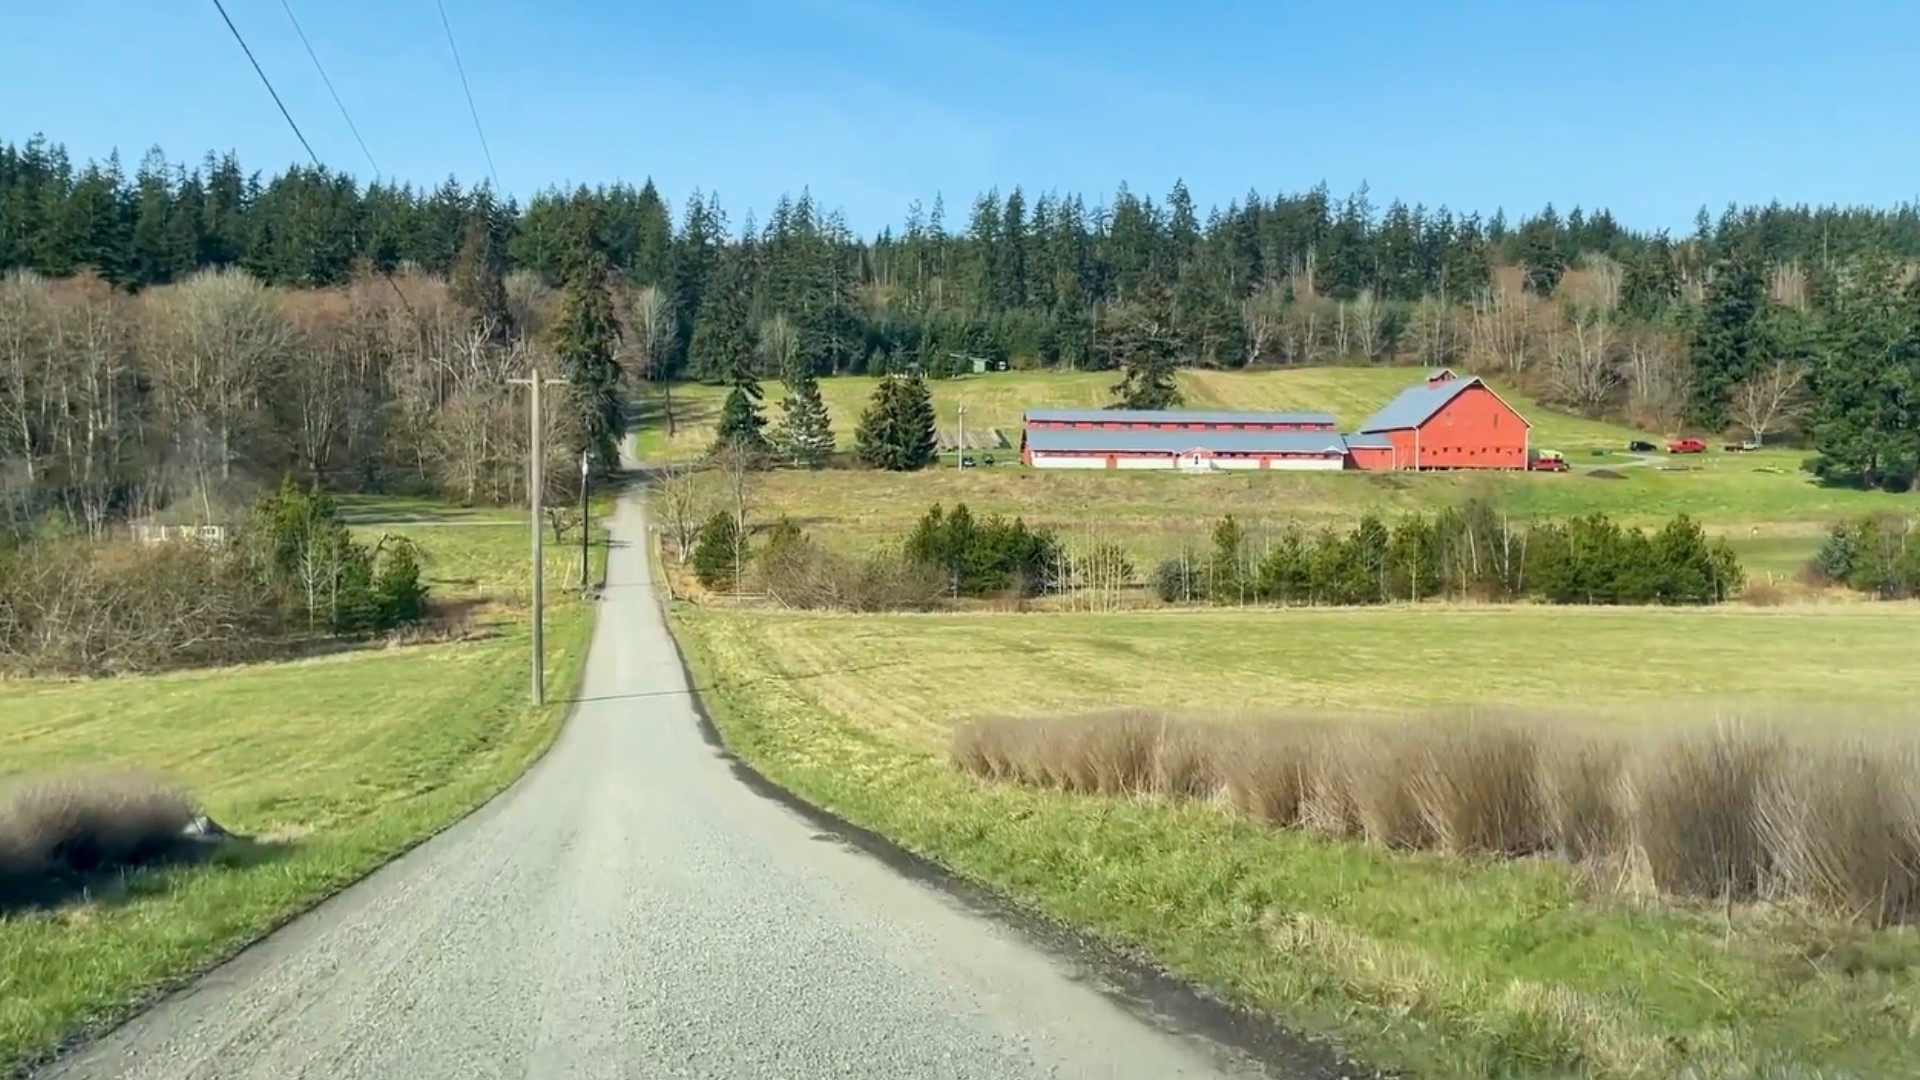 Kristoferson Farm now part of Whidbey Camano Land Trust. #K5evening